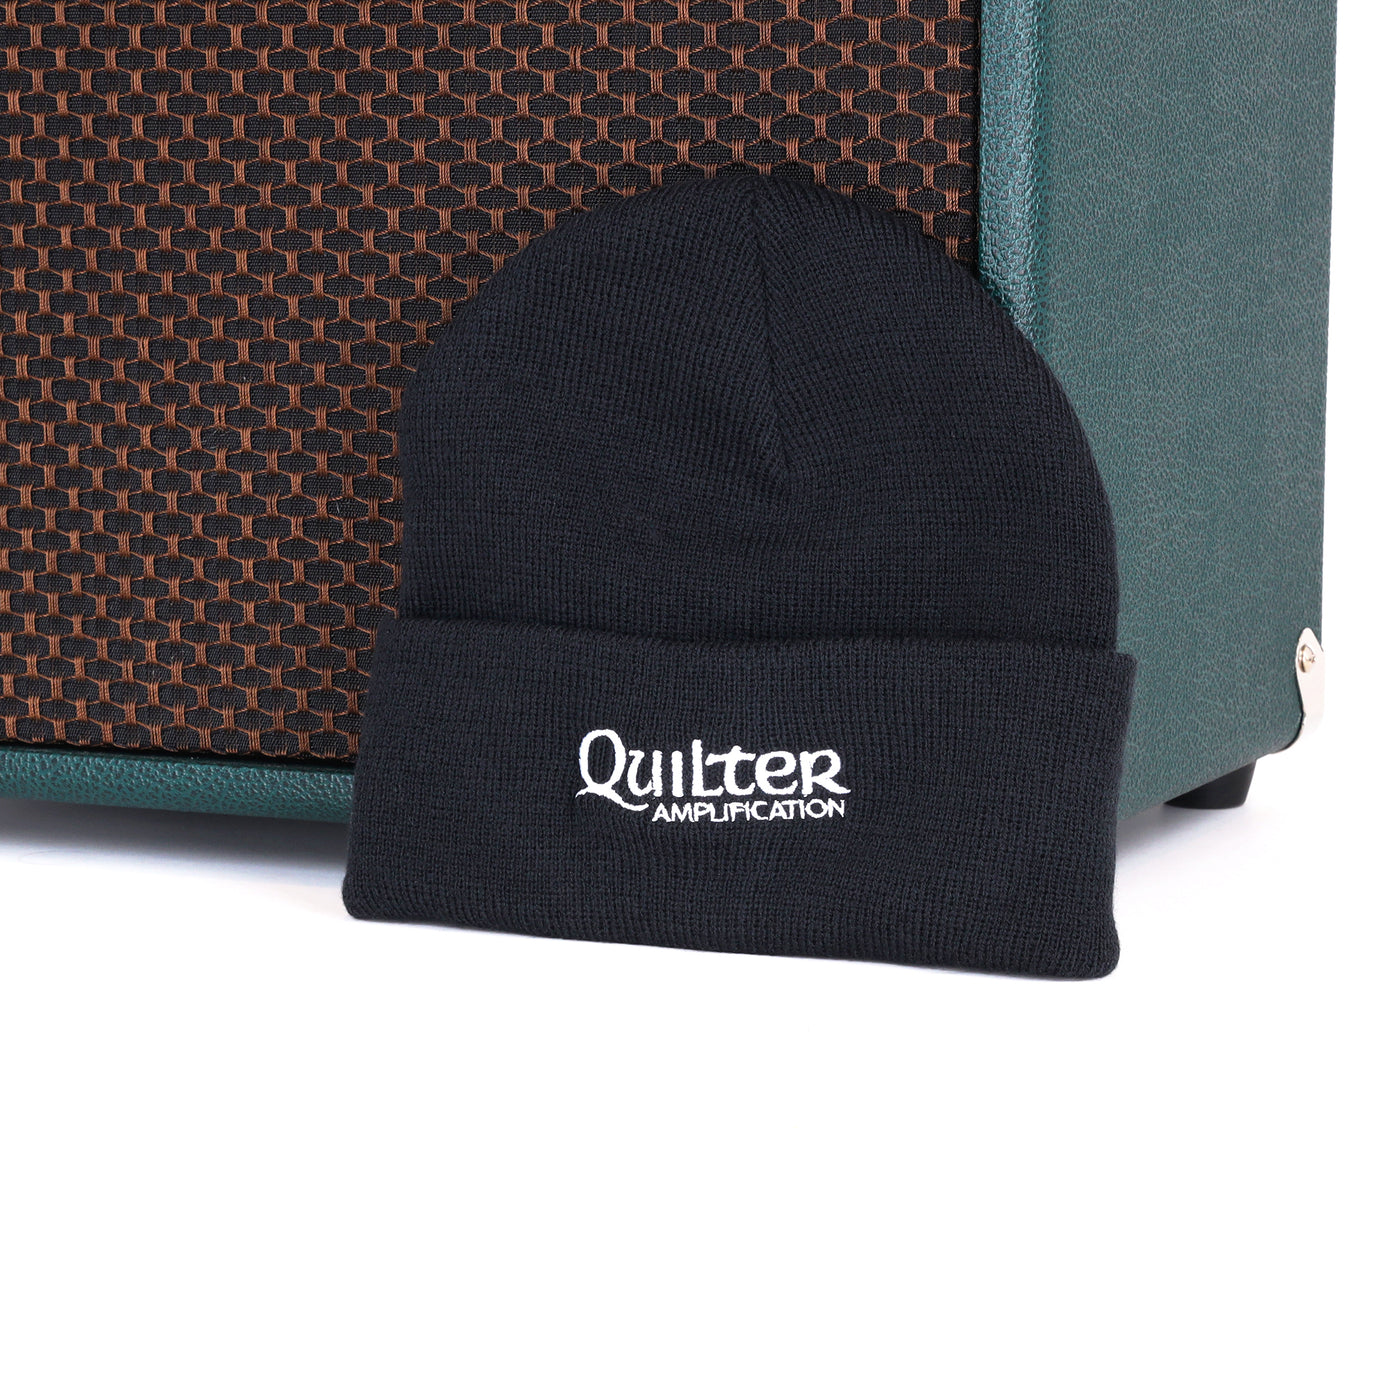 Quilter Labs Black beanie leaning up against an Aviator Cub UK